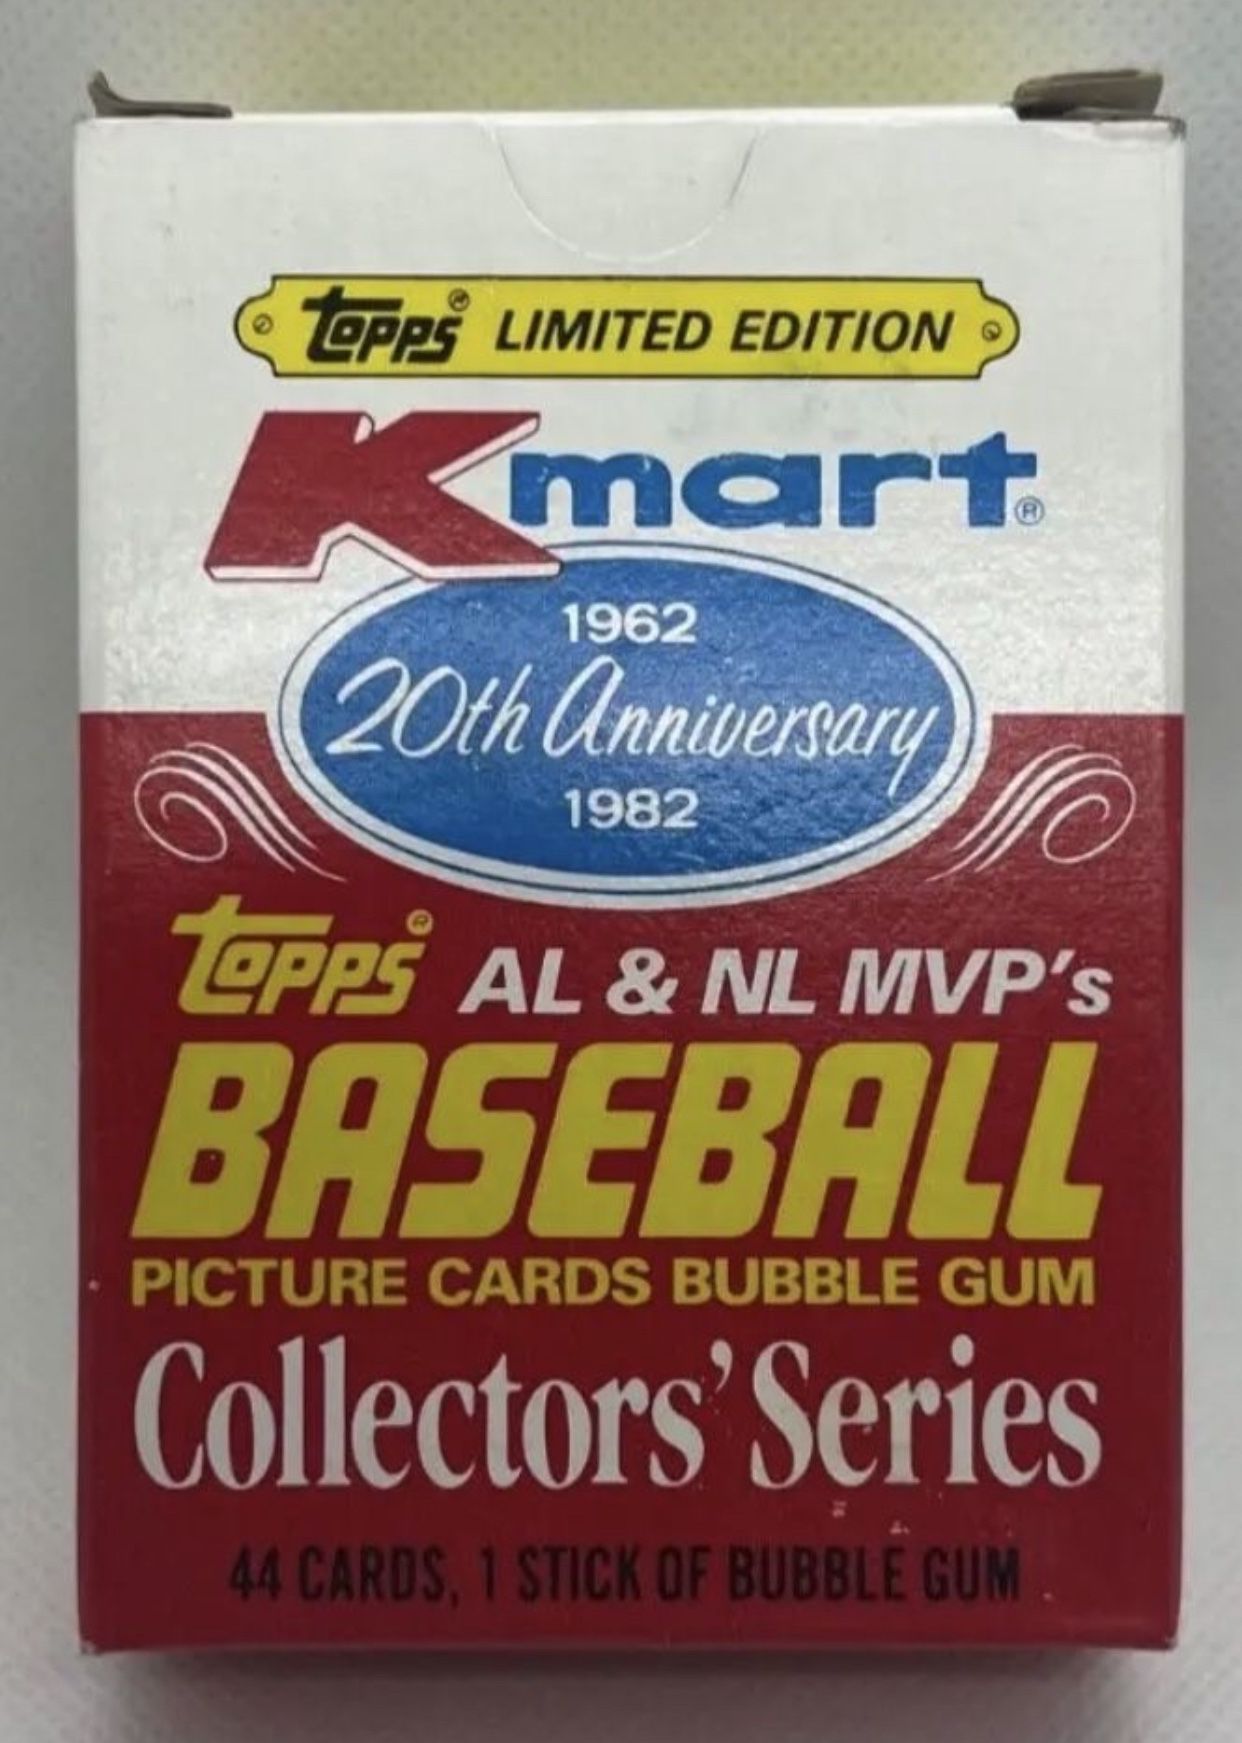 1982 Topps Kmart 20th Anniversary Complete Baseball Card Set Mickey Mantle! Plus+